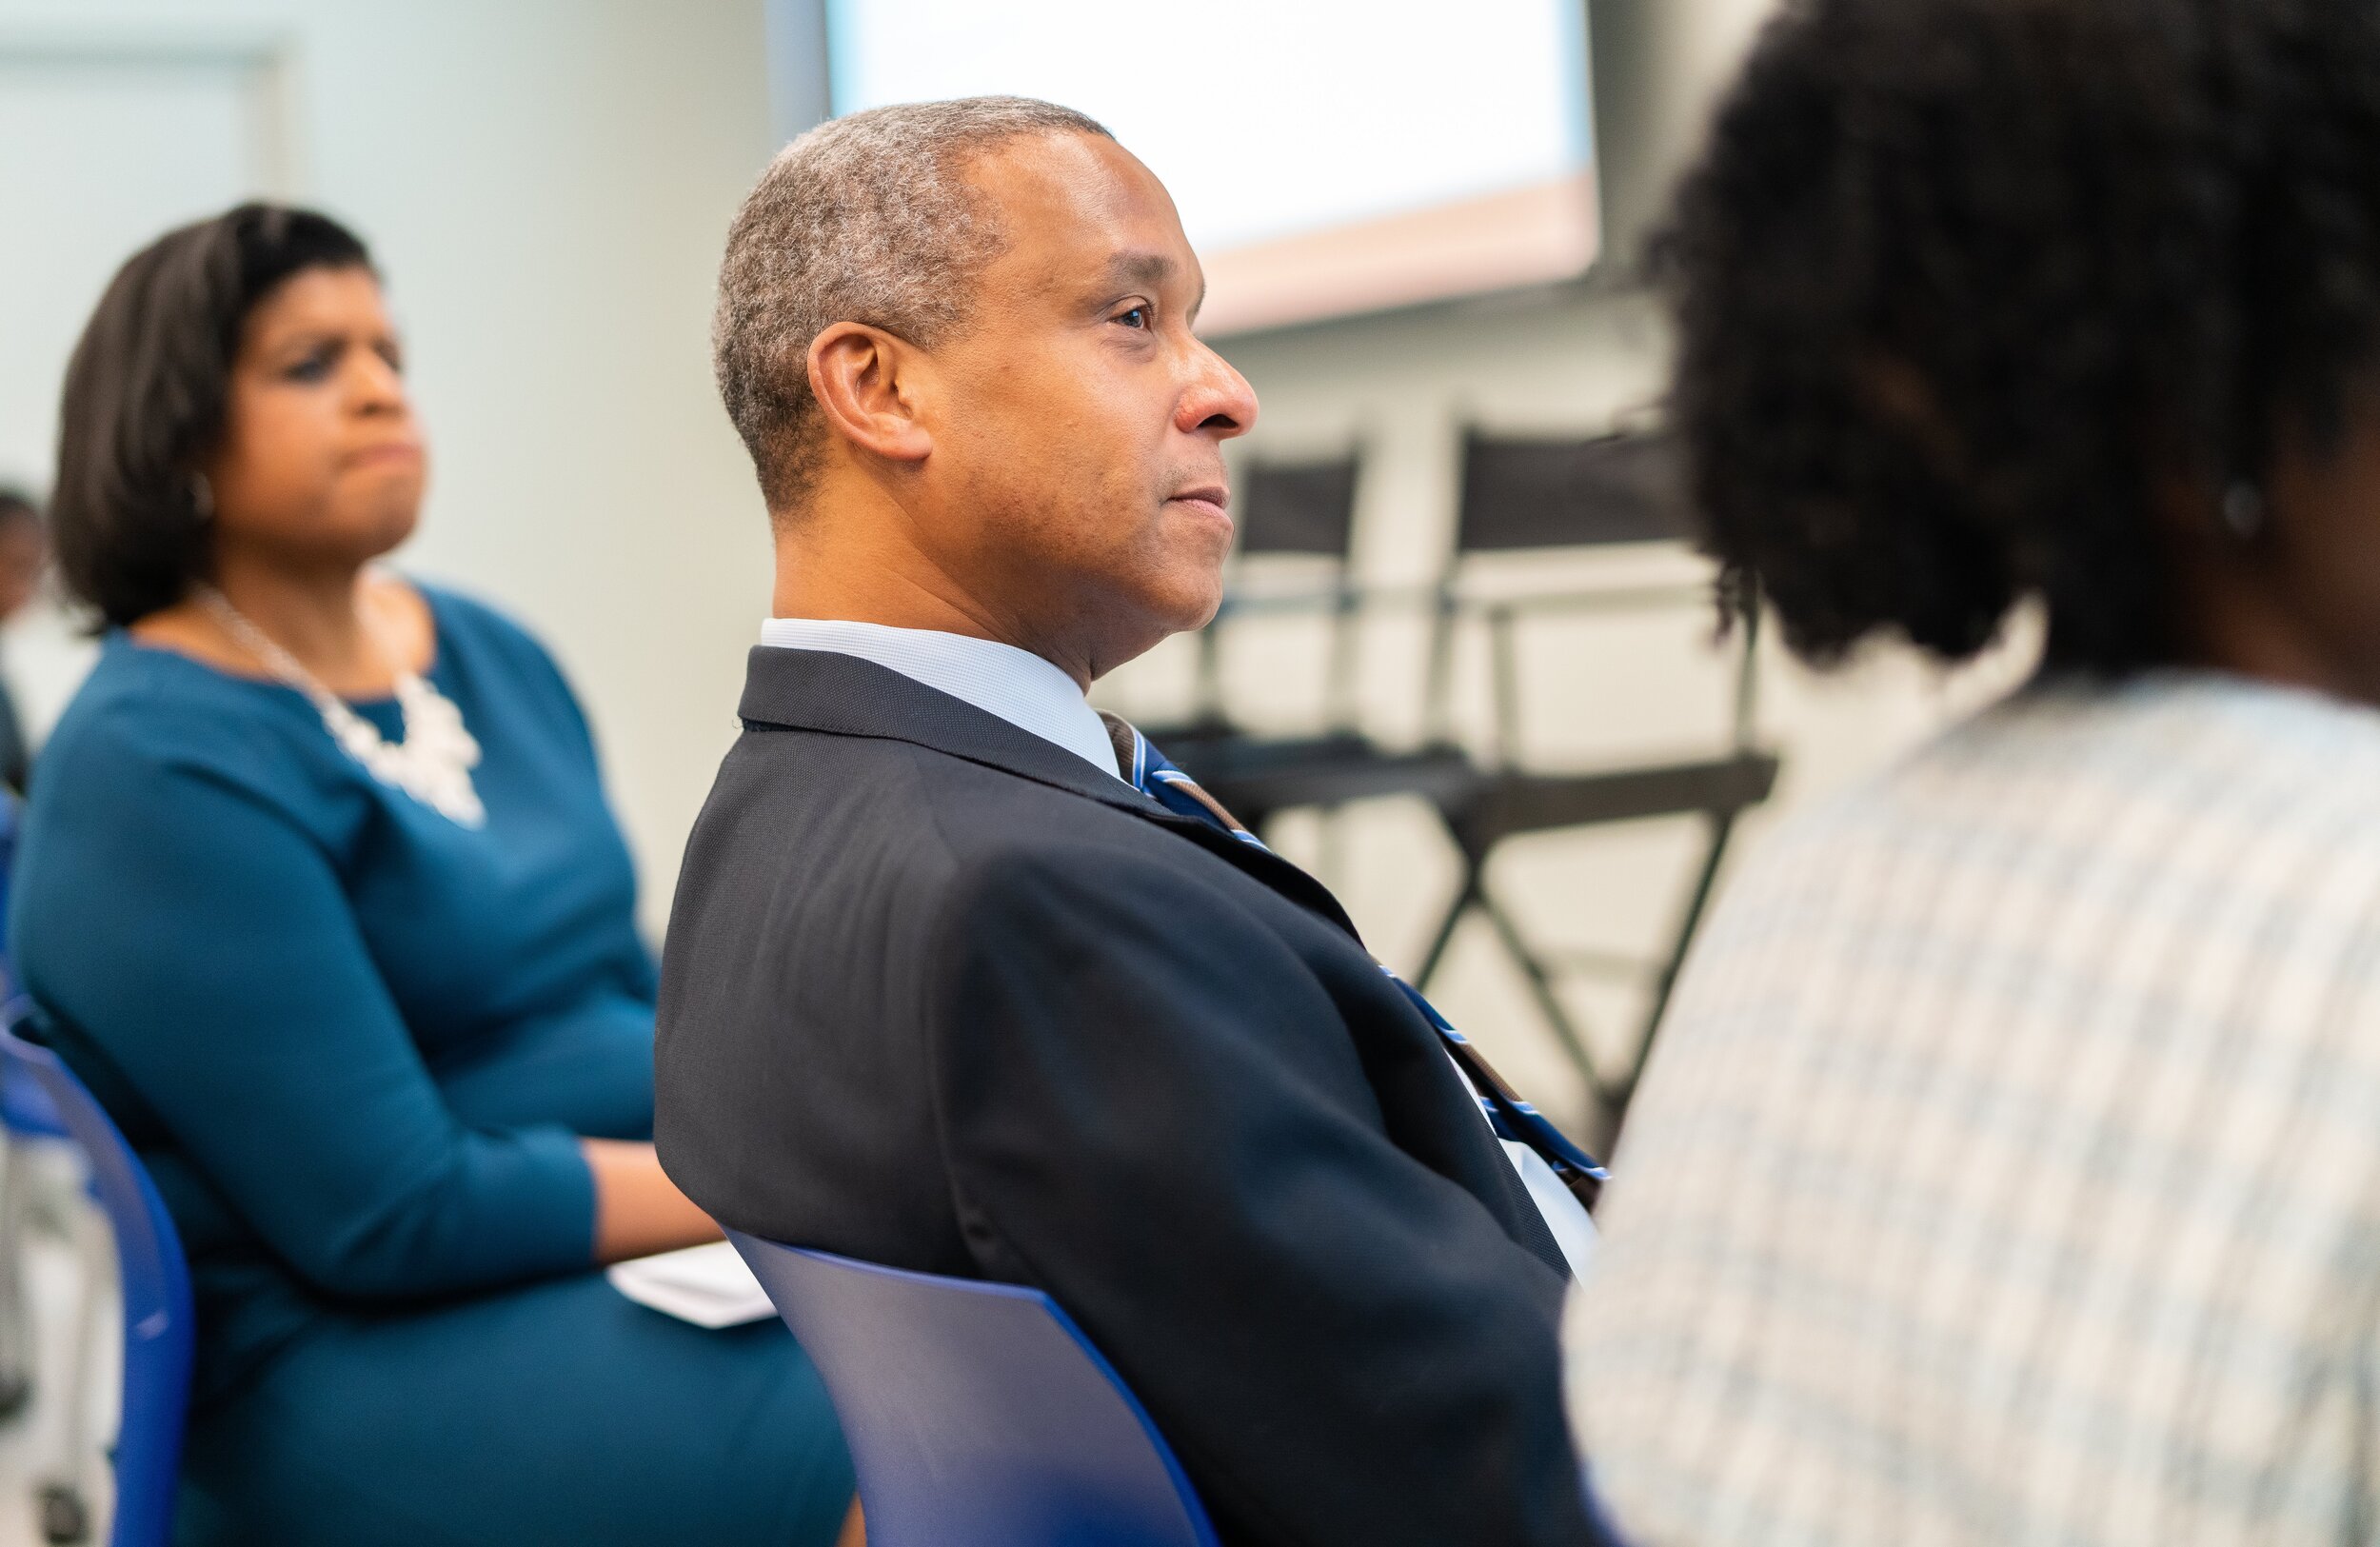   SUNY Downstate Health Sciences University President Wayne Riley listens to keynote speaker Dr. Christina Greer at Wednesday’s 27th Arthur Ashe Memorial Lecture.   